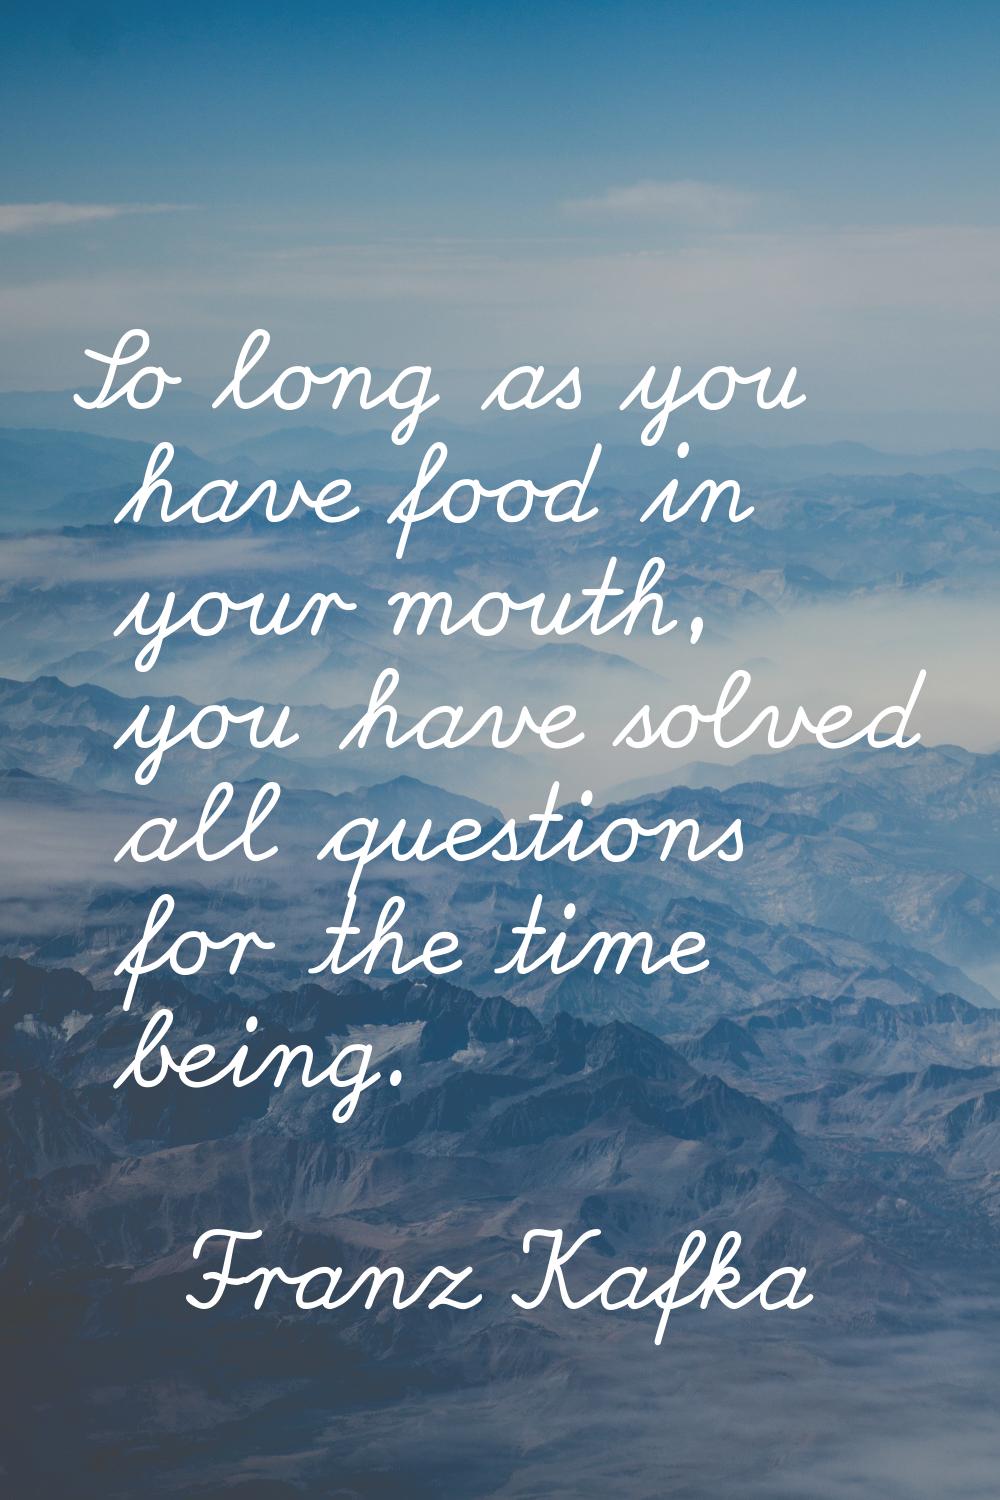 So long as you have food in your mouth, you have solved all questions for the time being.